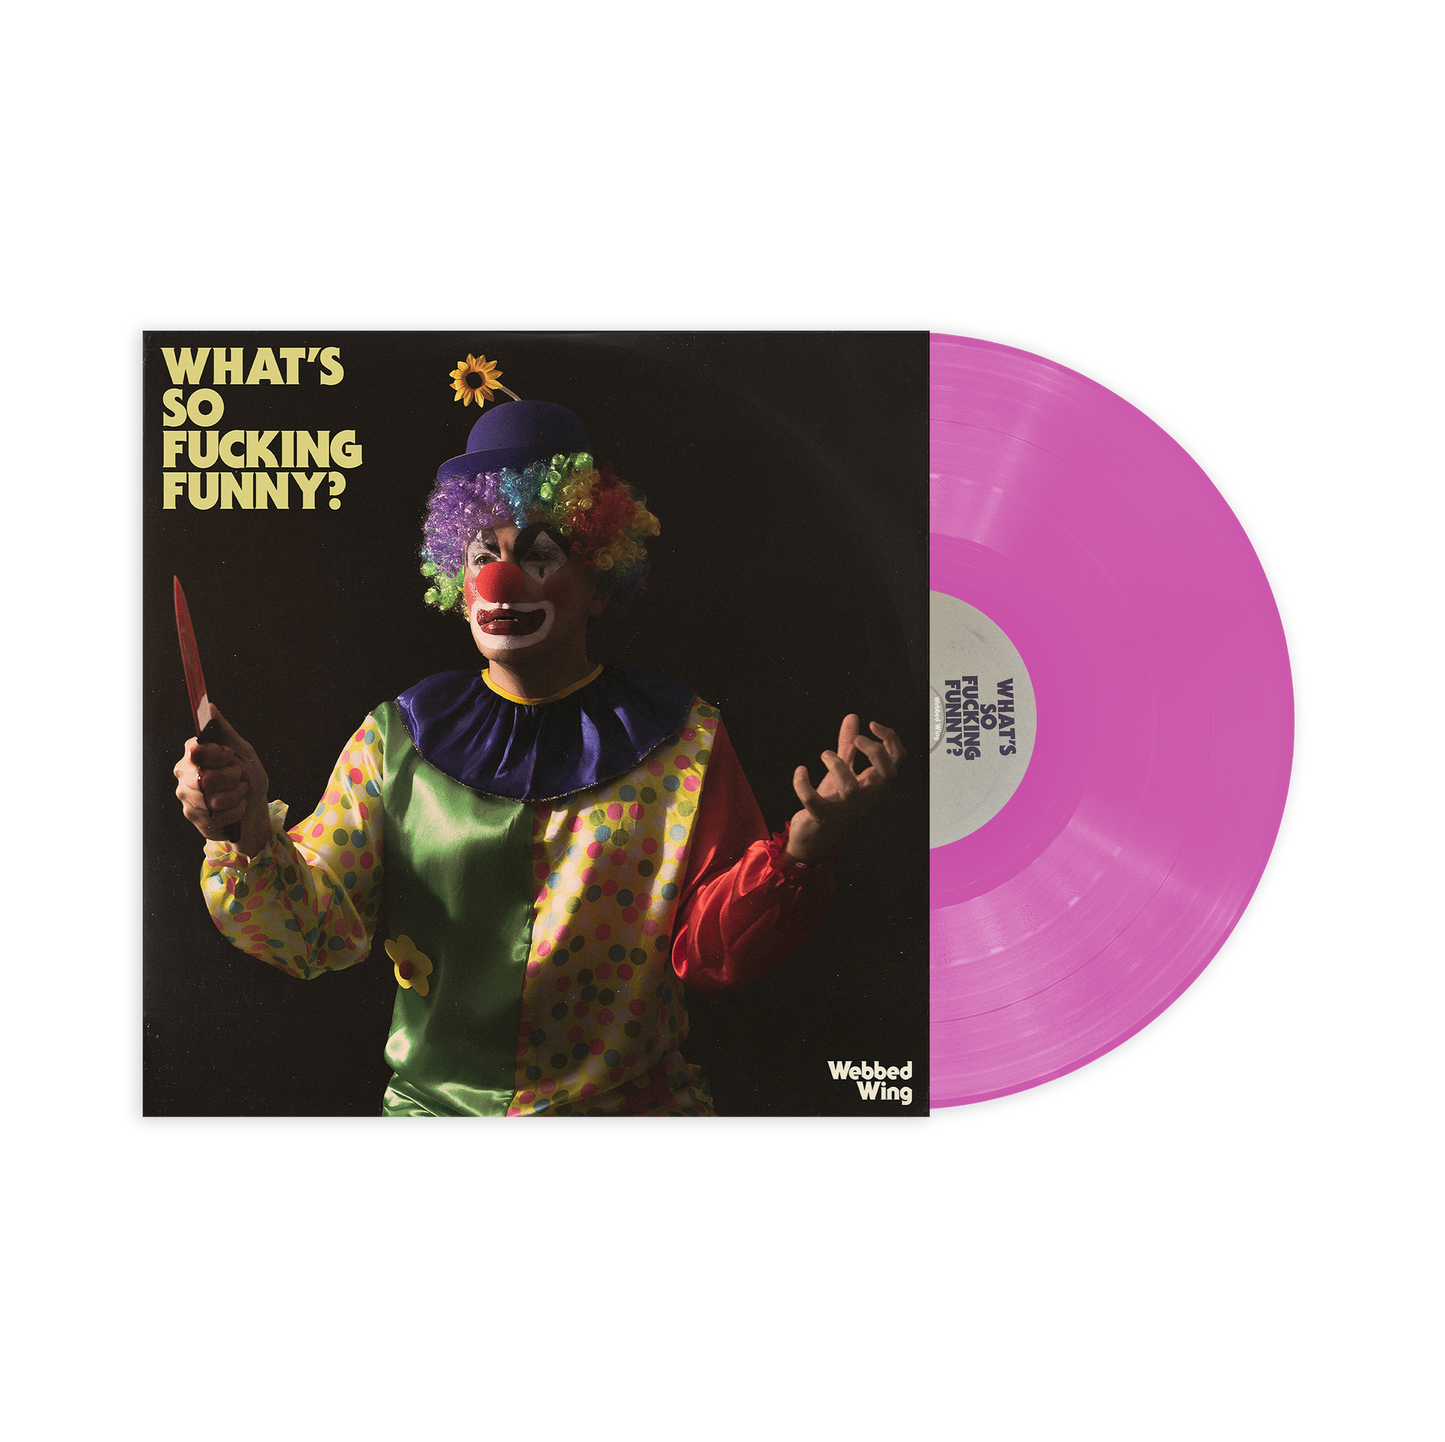 Webbed Wing "What's So Fucking Funny" LP